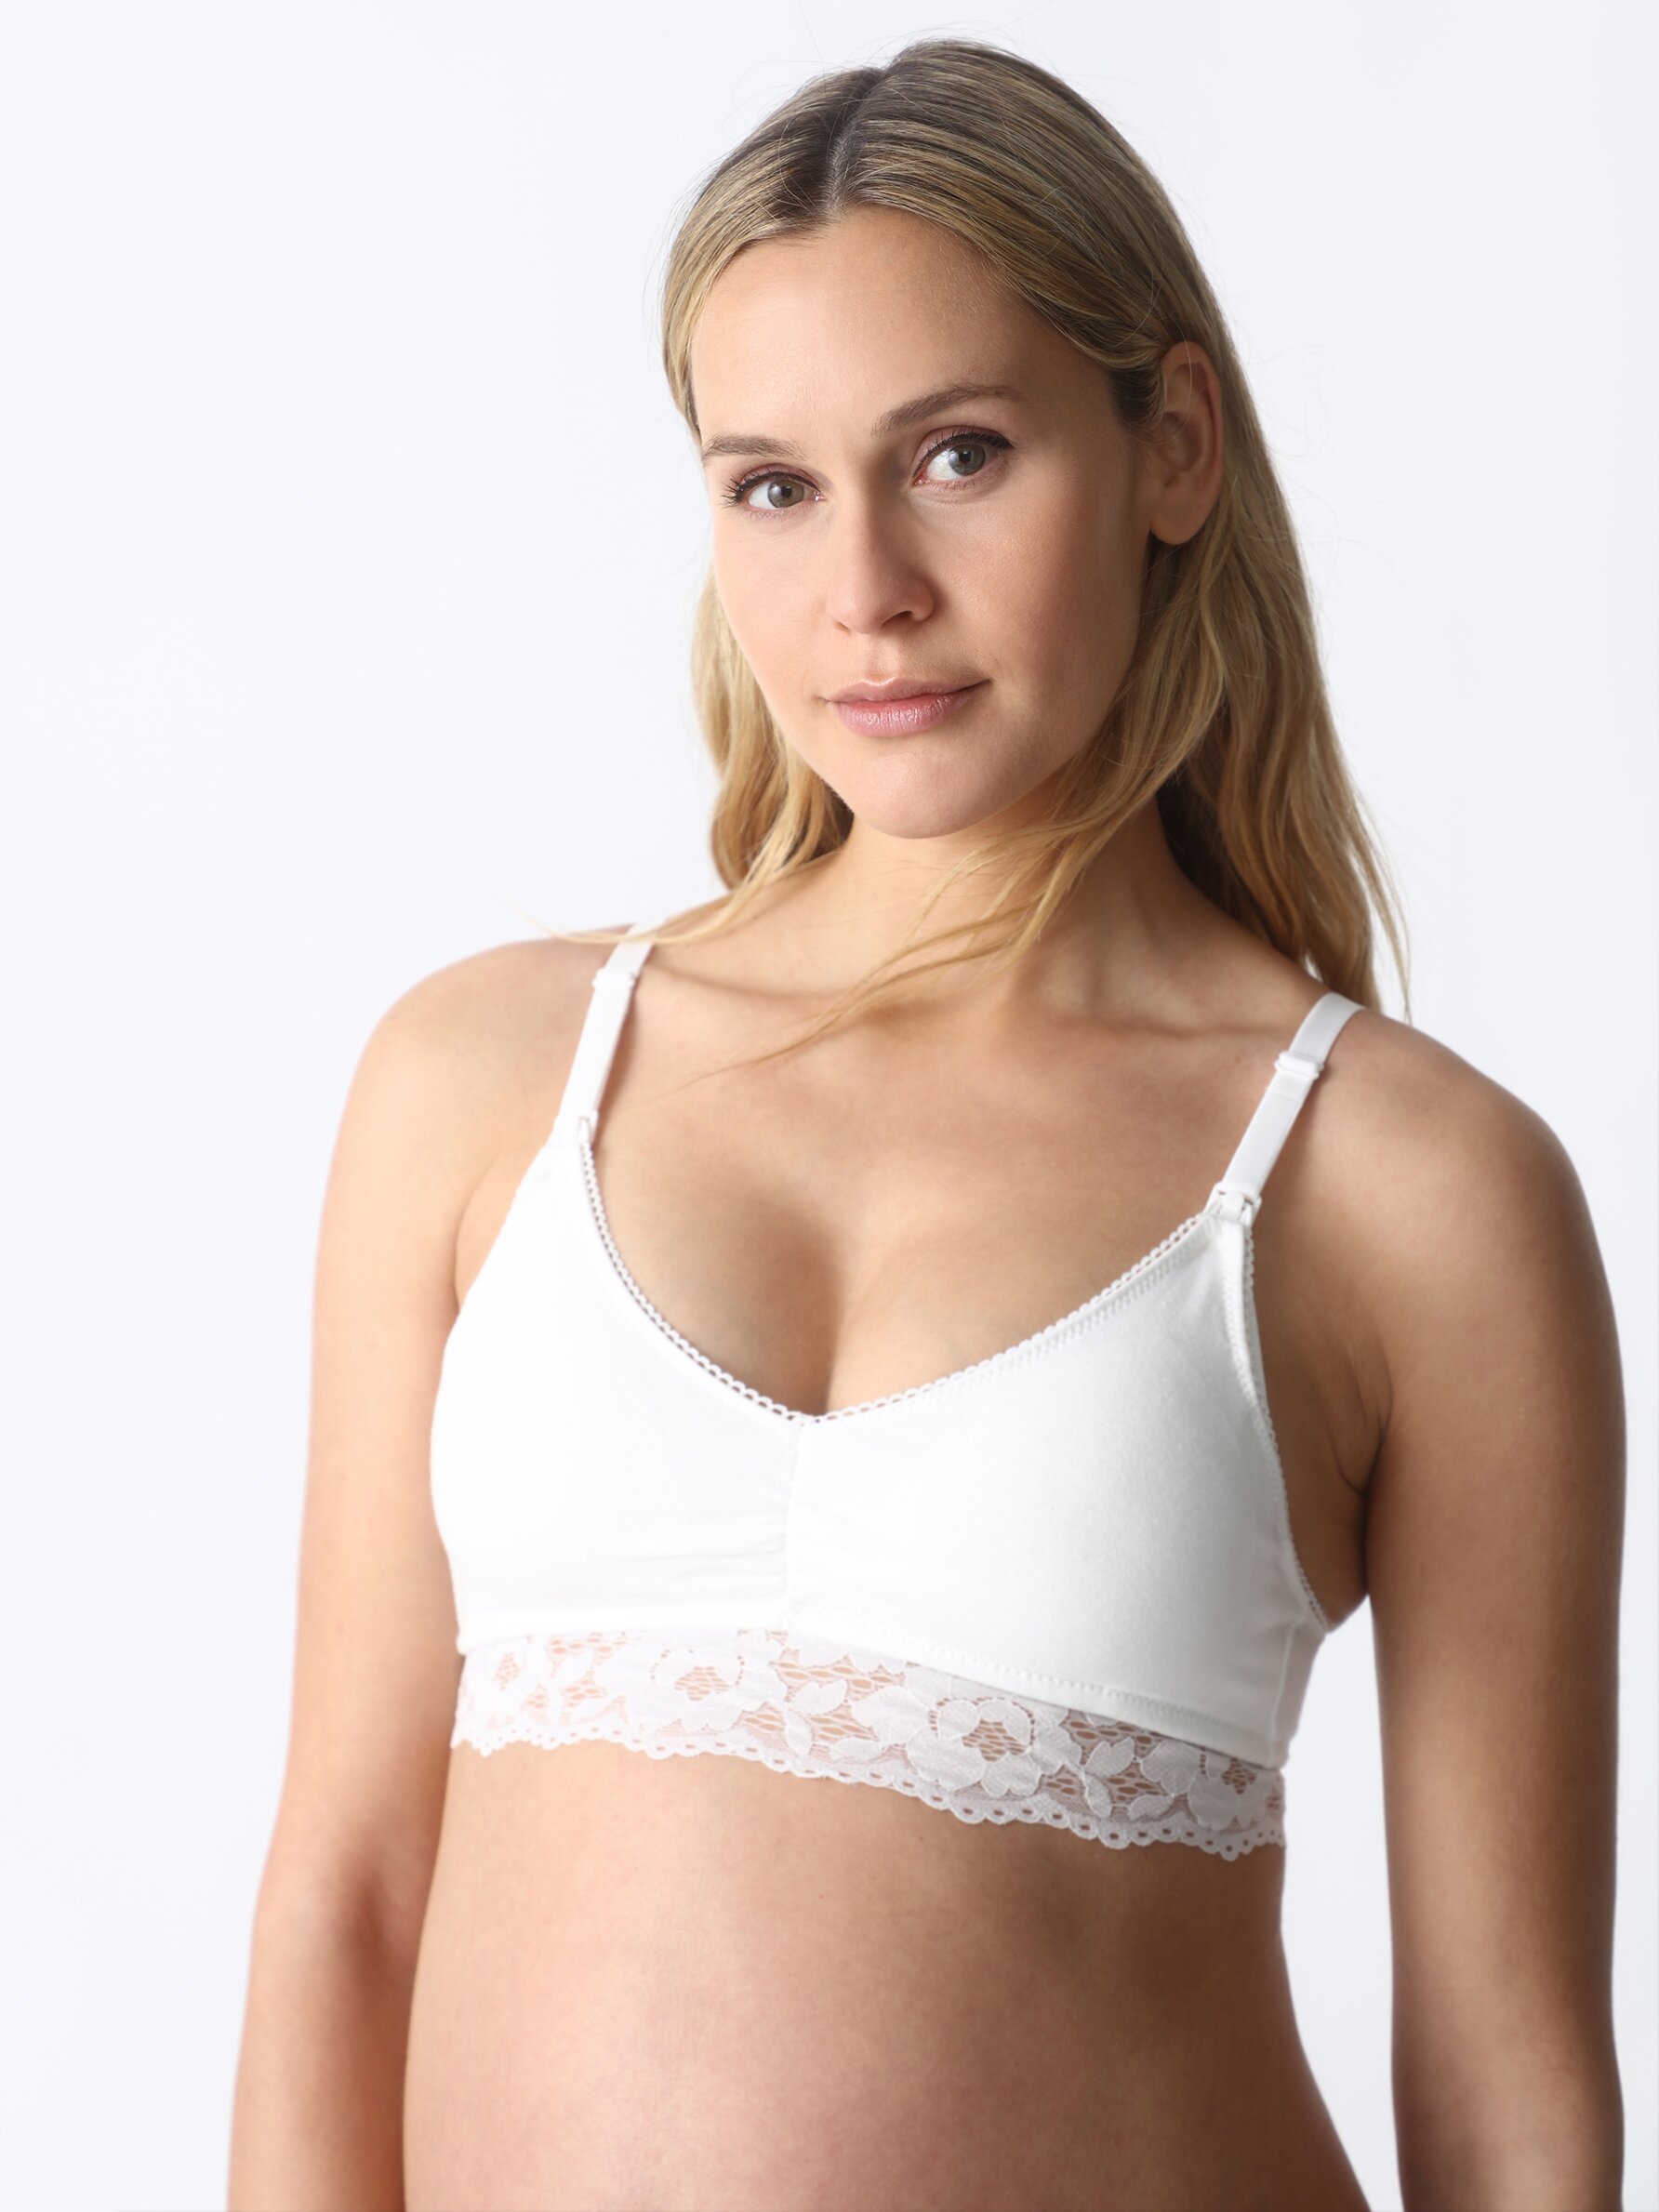 Pack of 2 lace nursing bras - Maternity - Underwear - CLOTHING - Woman 